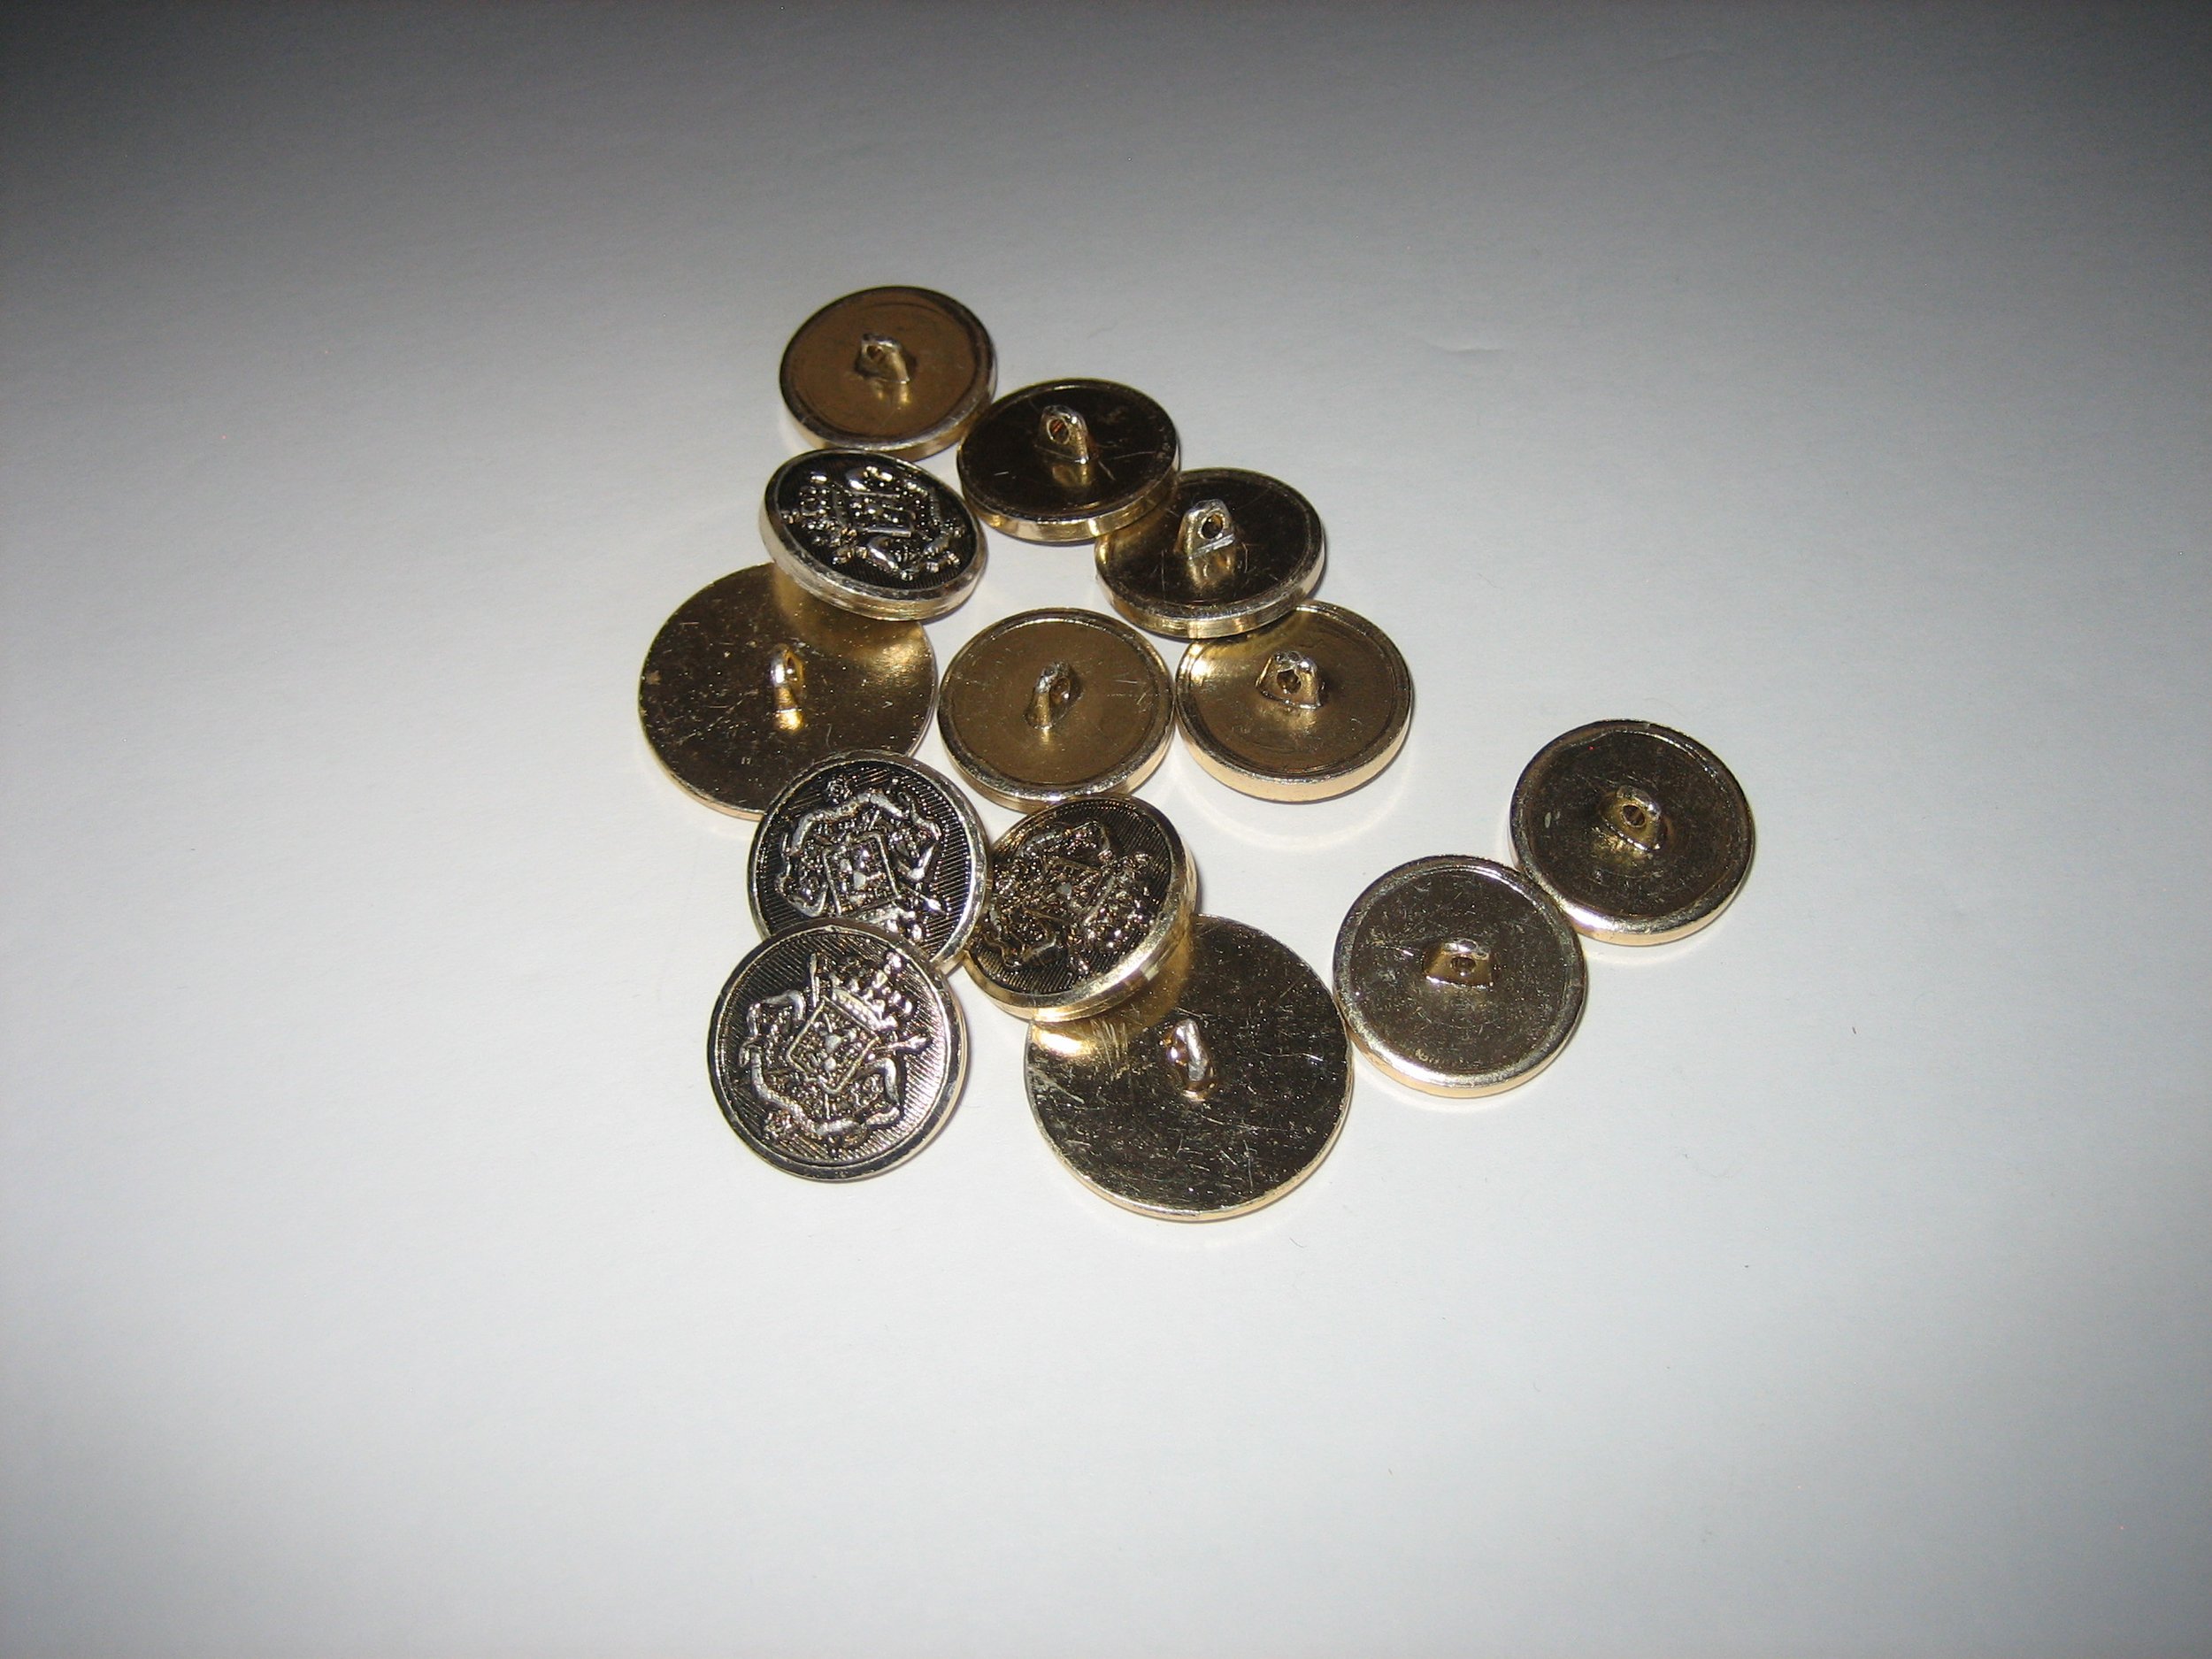 Silver Metal Buttons - Lot 1 — 183 Vintage Buttons